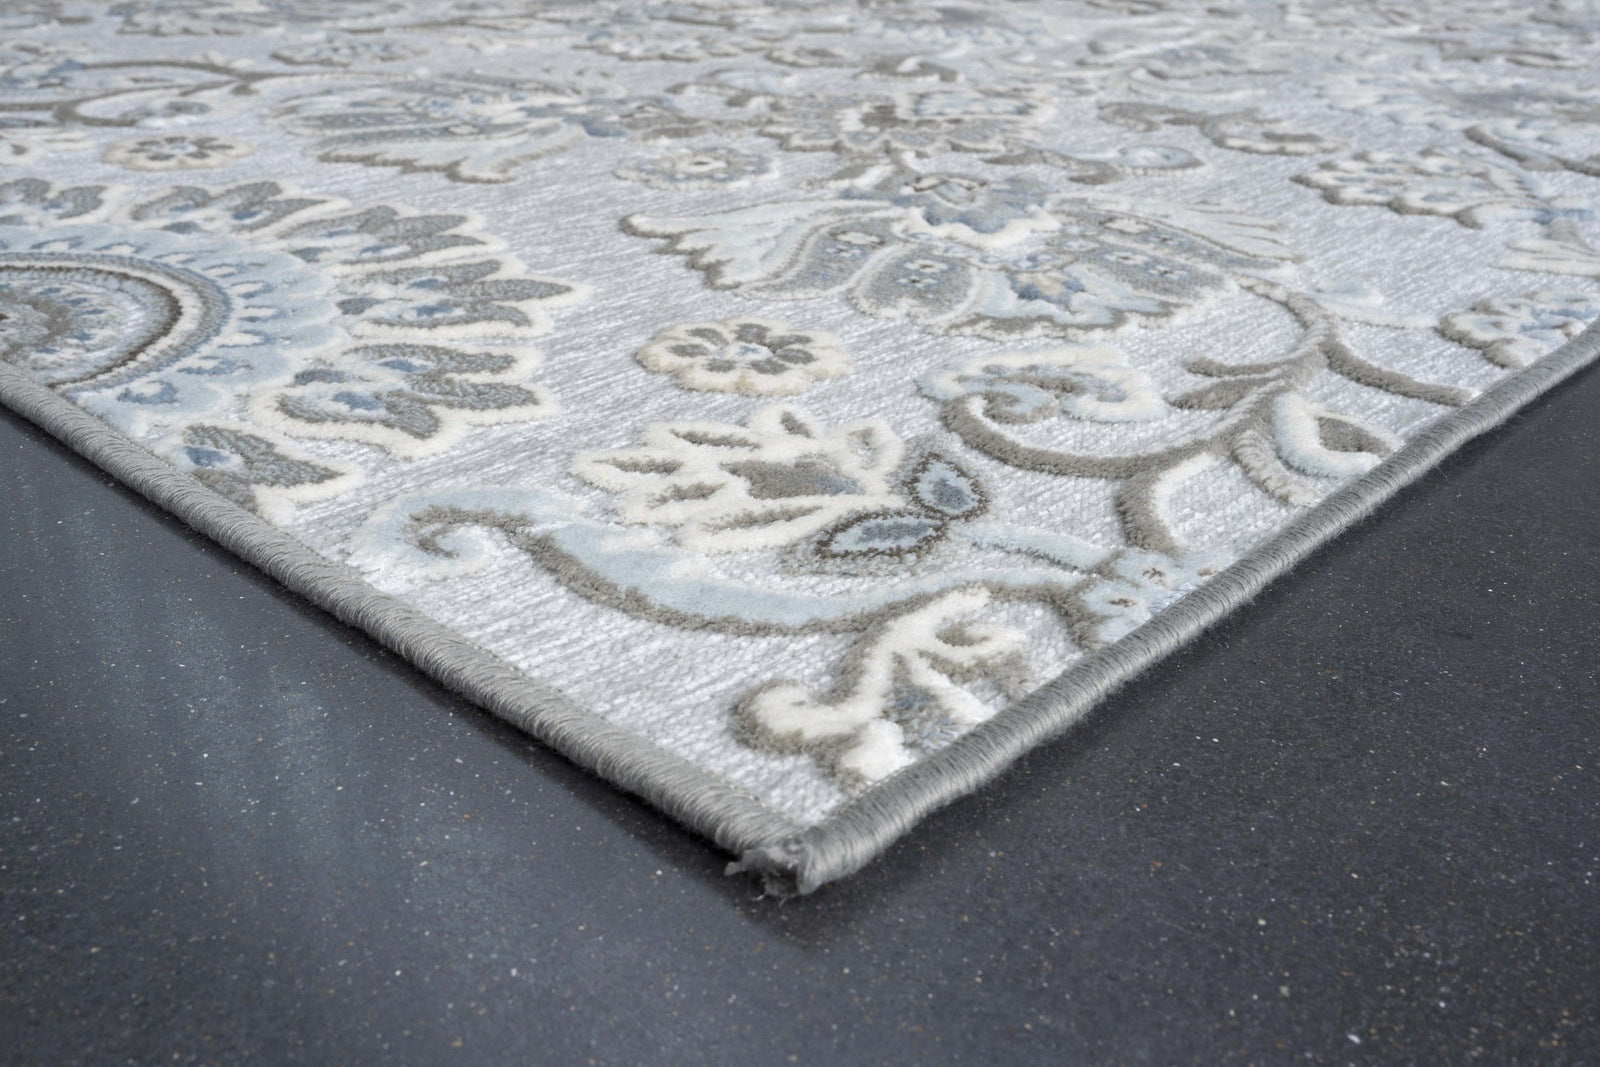 Lily Light Gray, Medium Gray, Blue and Ivory Chenille and Viscose High - Low Area Rug